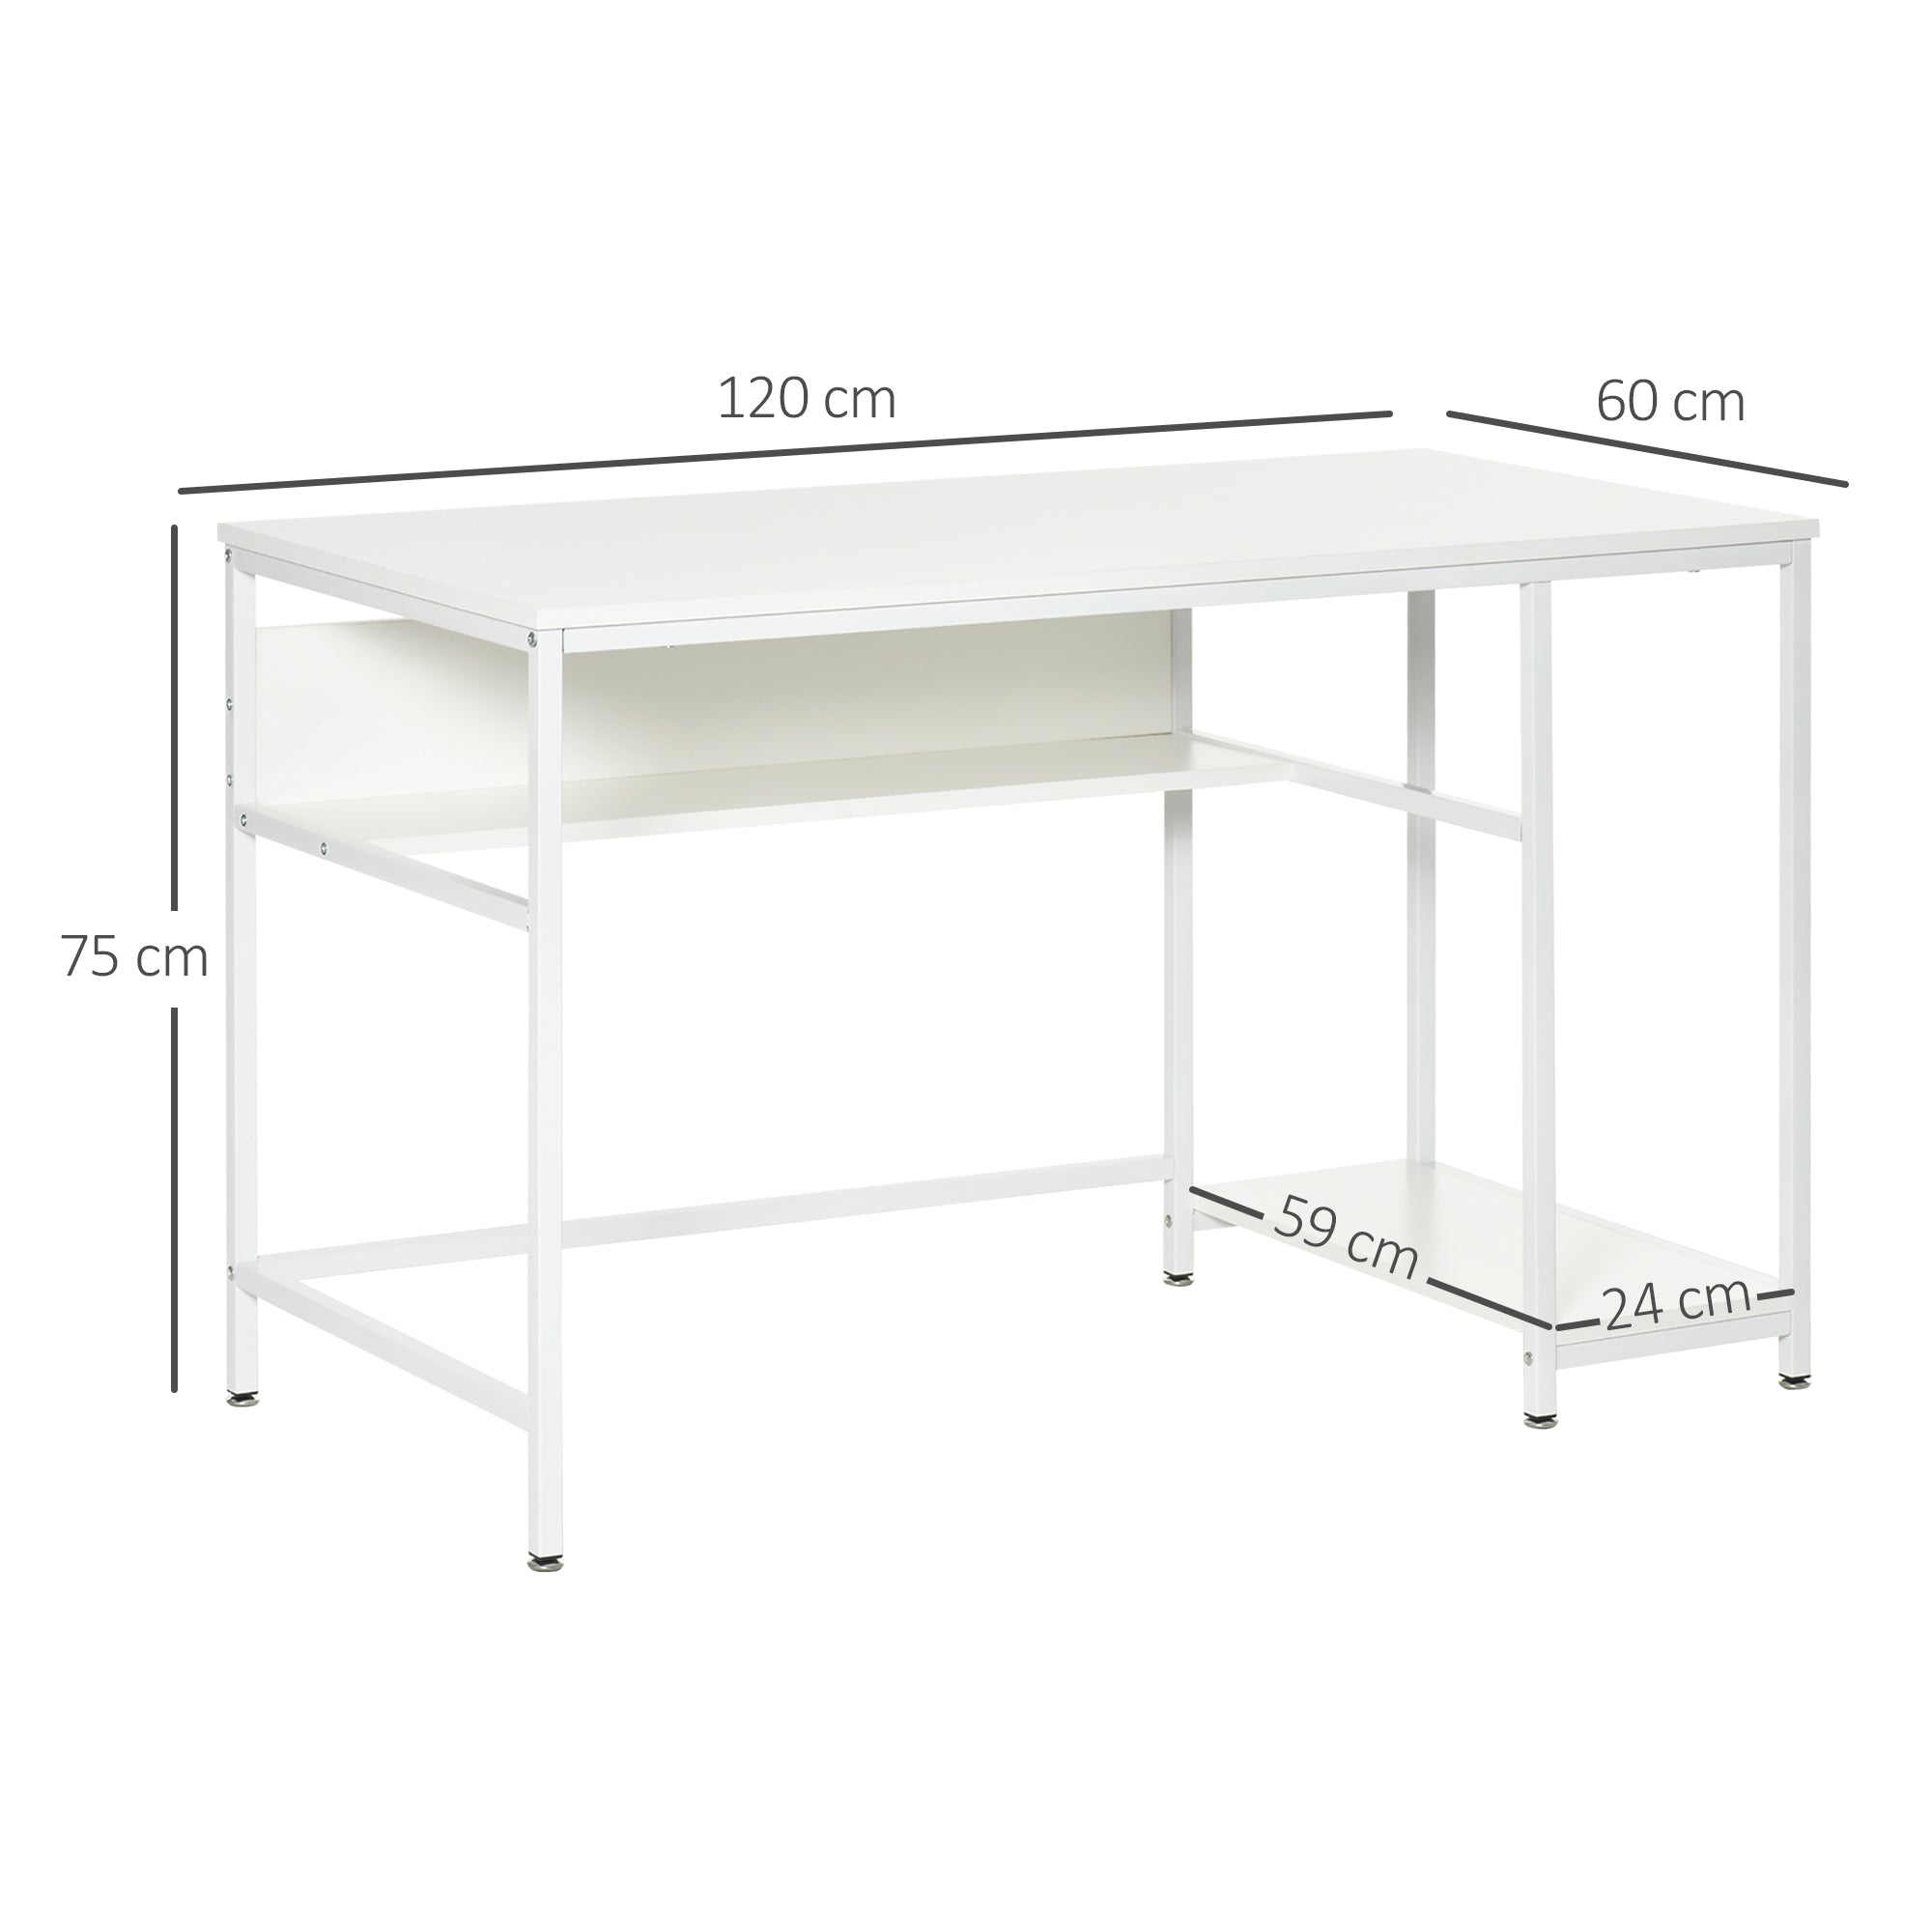 HOMCOM Home Compact Small Computer Desk Writing Study Table Office PC Workstation Gaming Studying with Storage Shelf, White - Inspirely